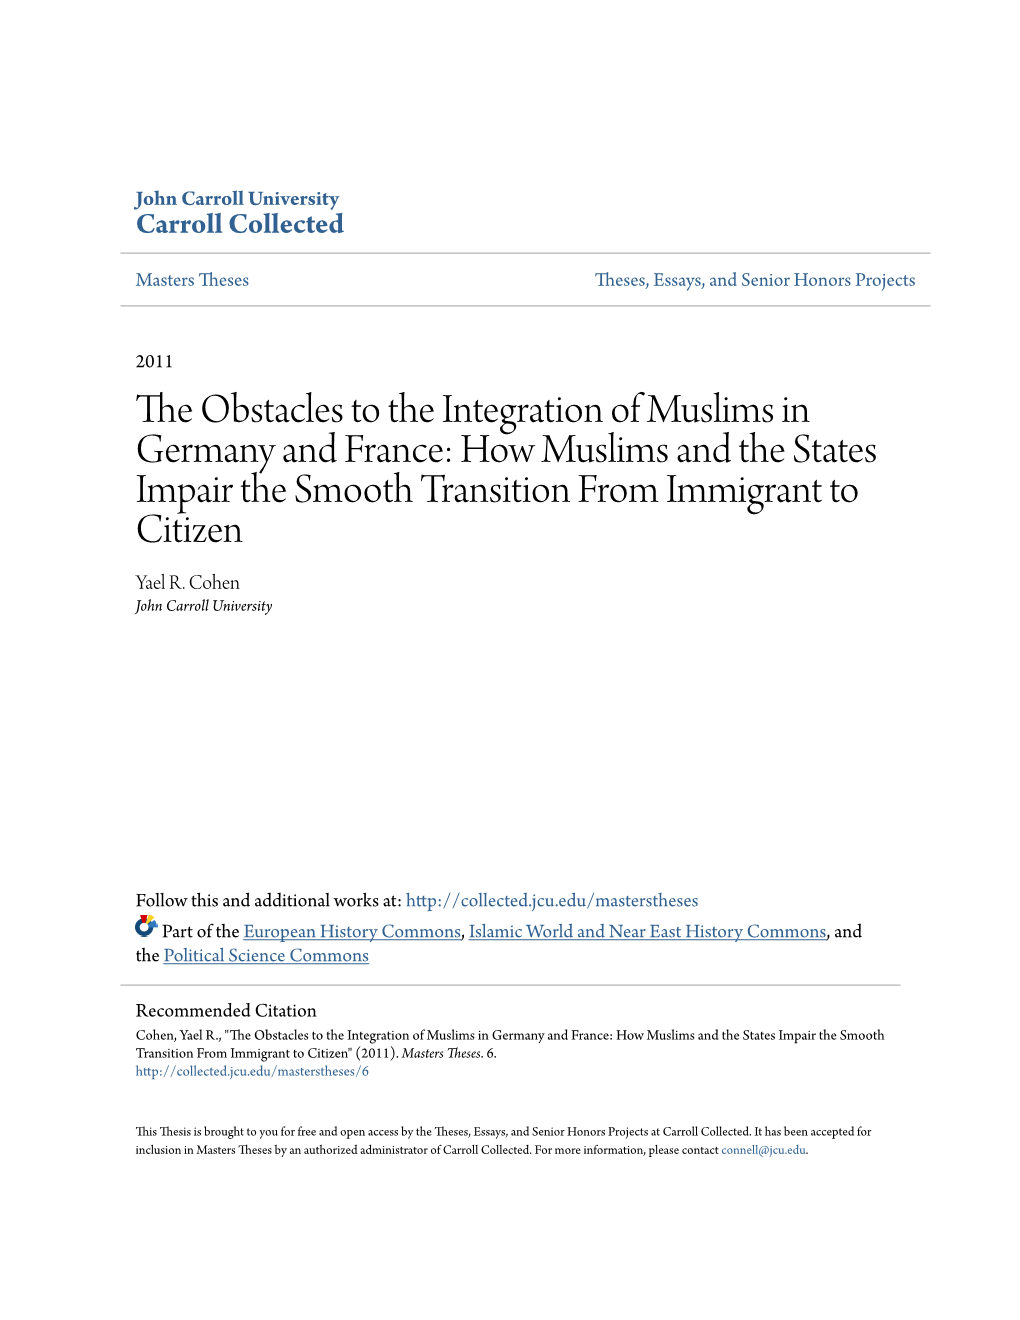 The Obstacles to the Integration of Muslims in Germany and France: How Muslims and the States Impair the Smooth Transition from Immigrant to Citizen Yael R